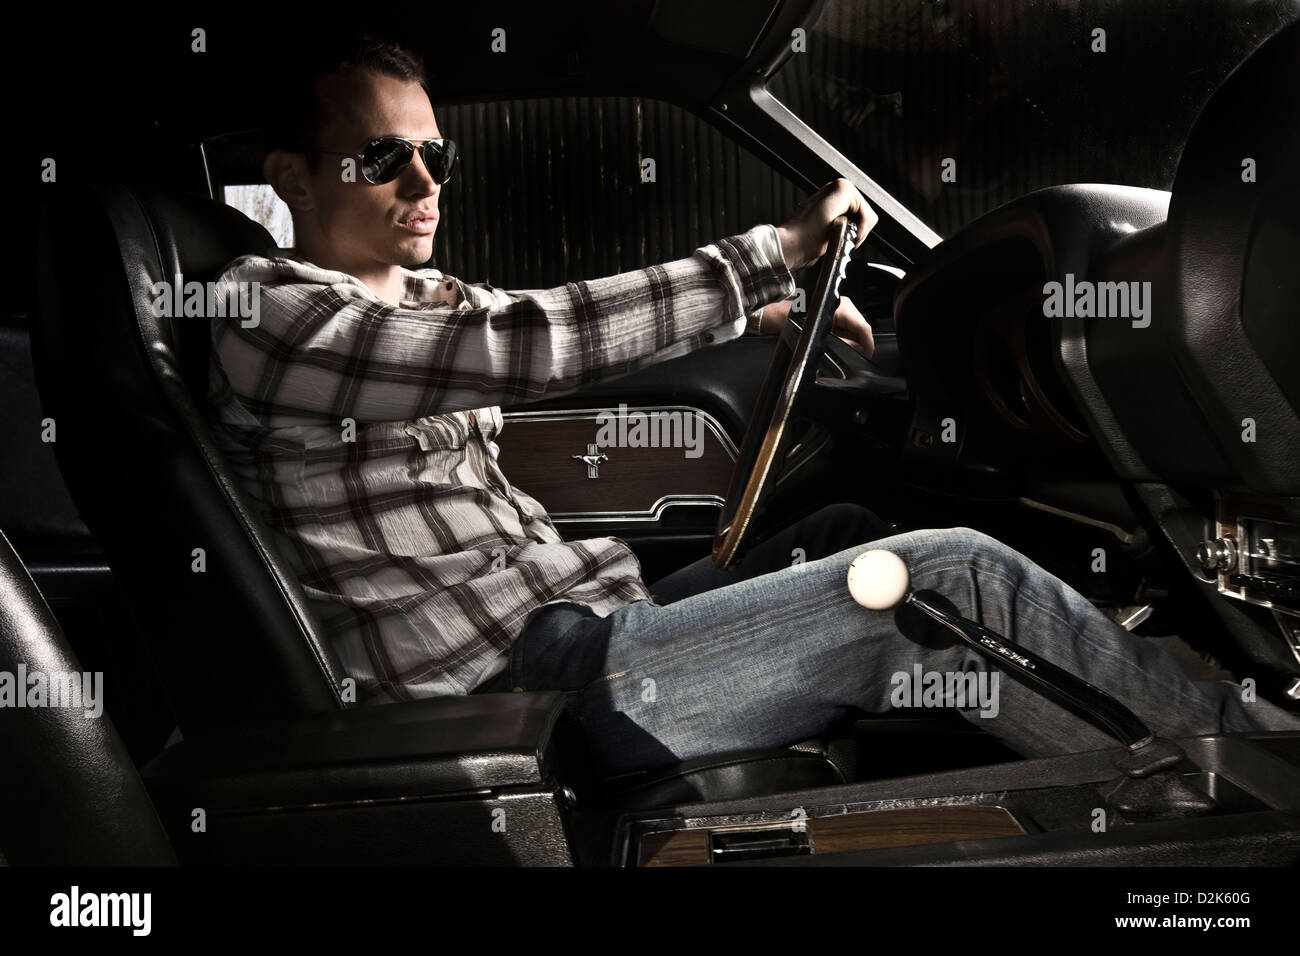 Young man at steering wheel of Ford Mustang Boss 429 sports car Stock Photo